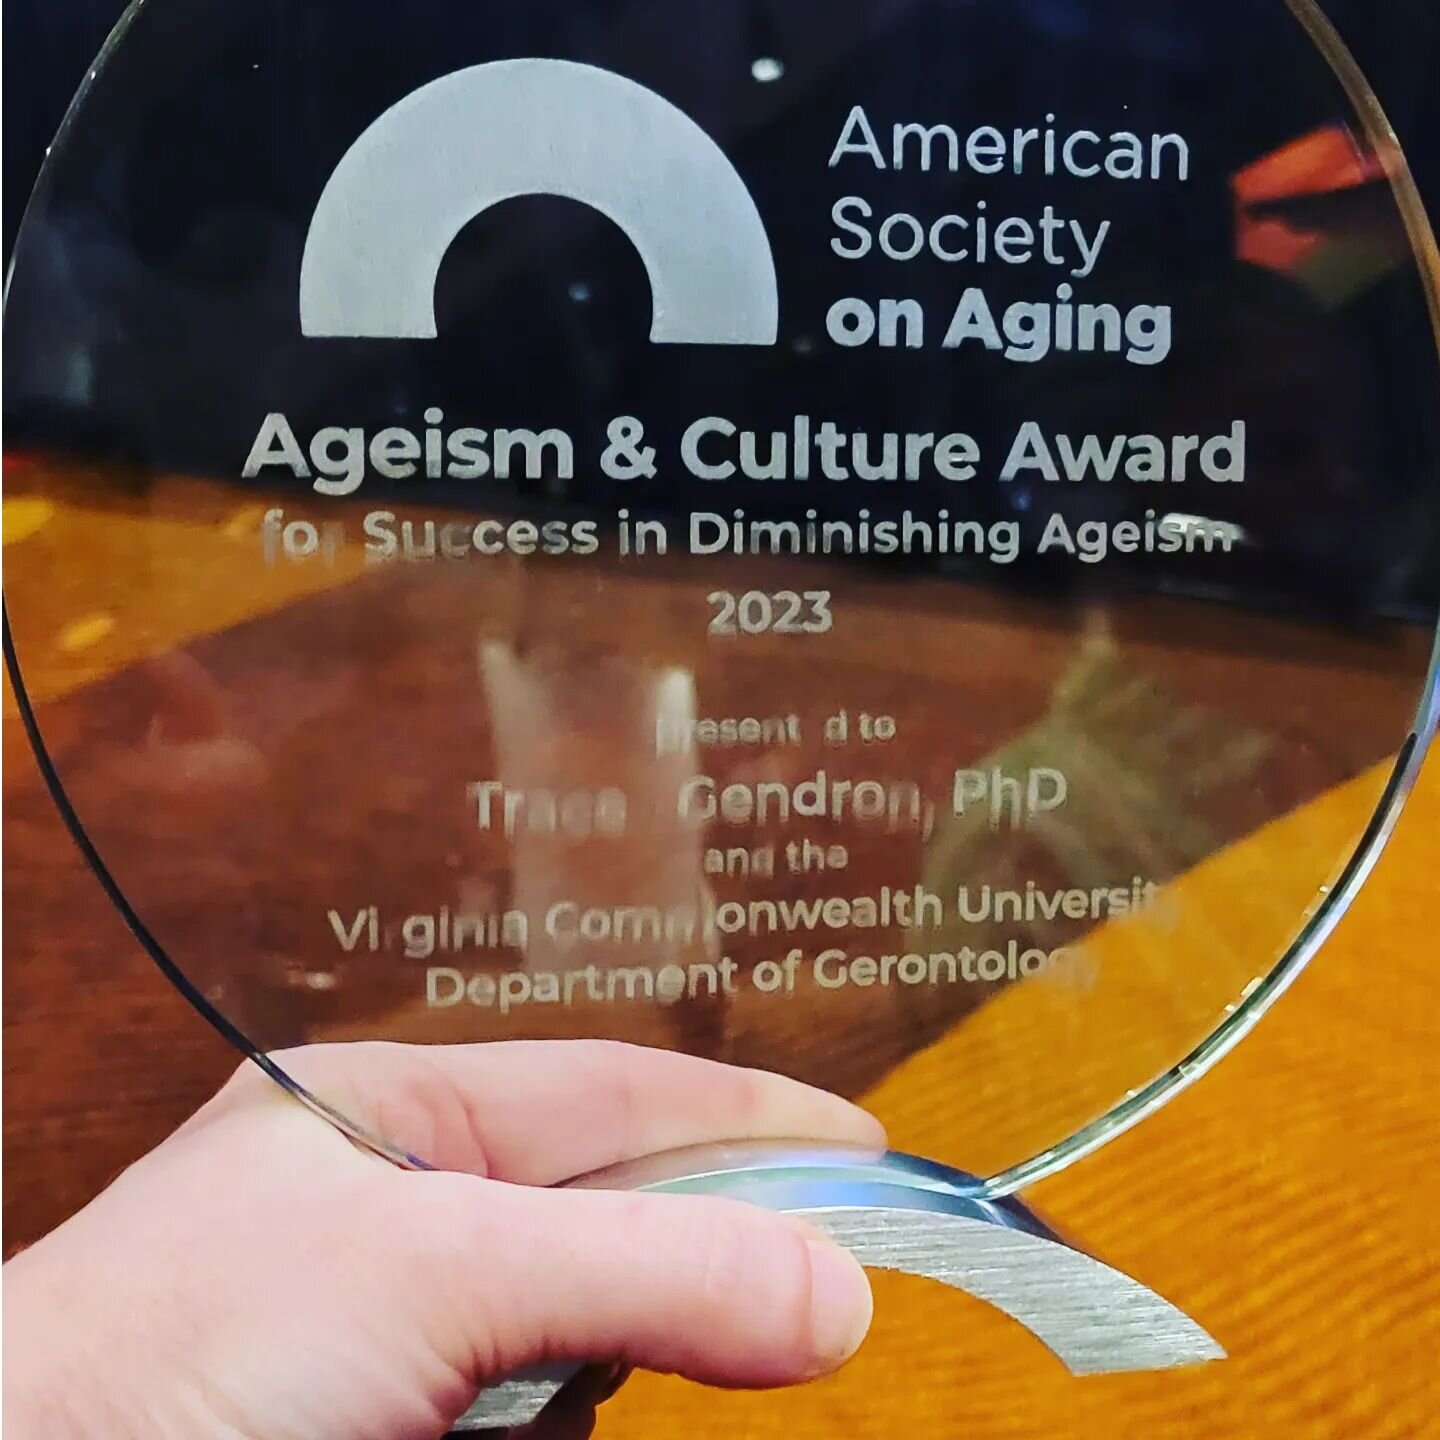 Honored to receive this award from ASA for diminishing ageism. So proud of be a part of VCU Gerontology!